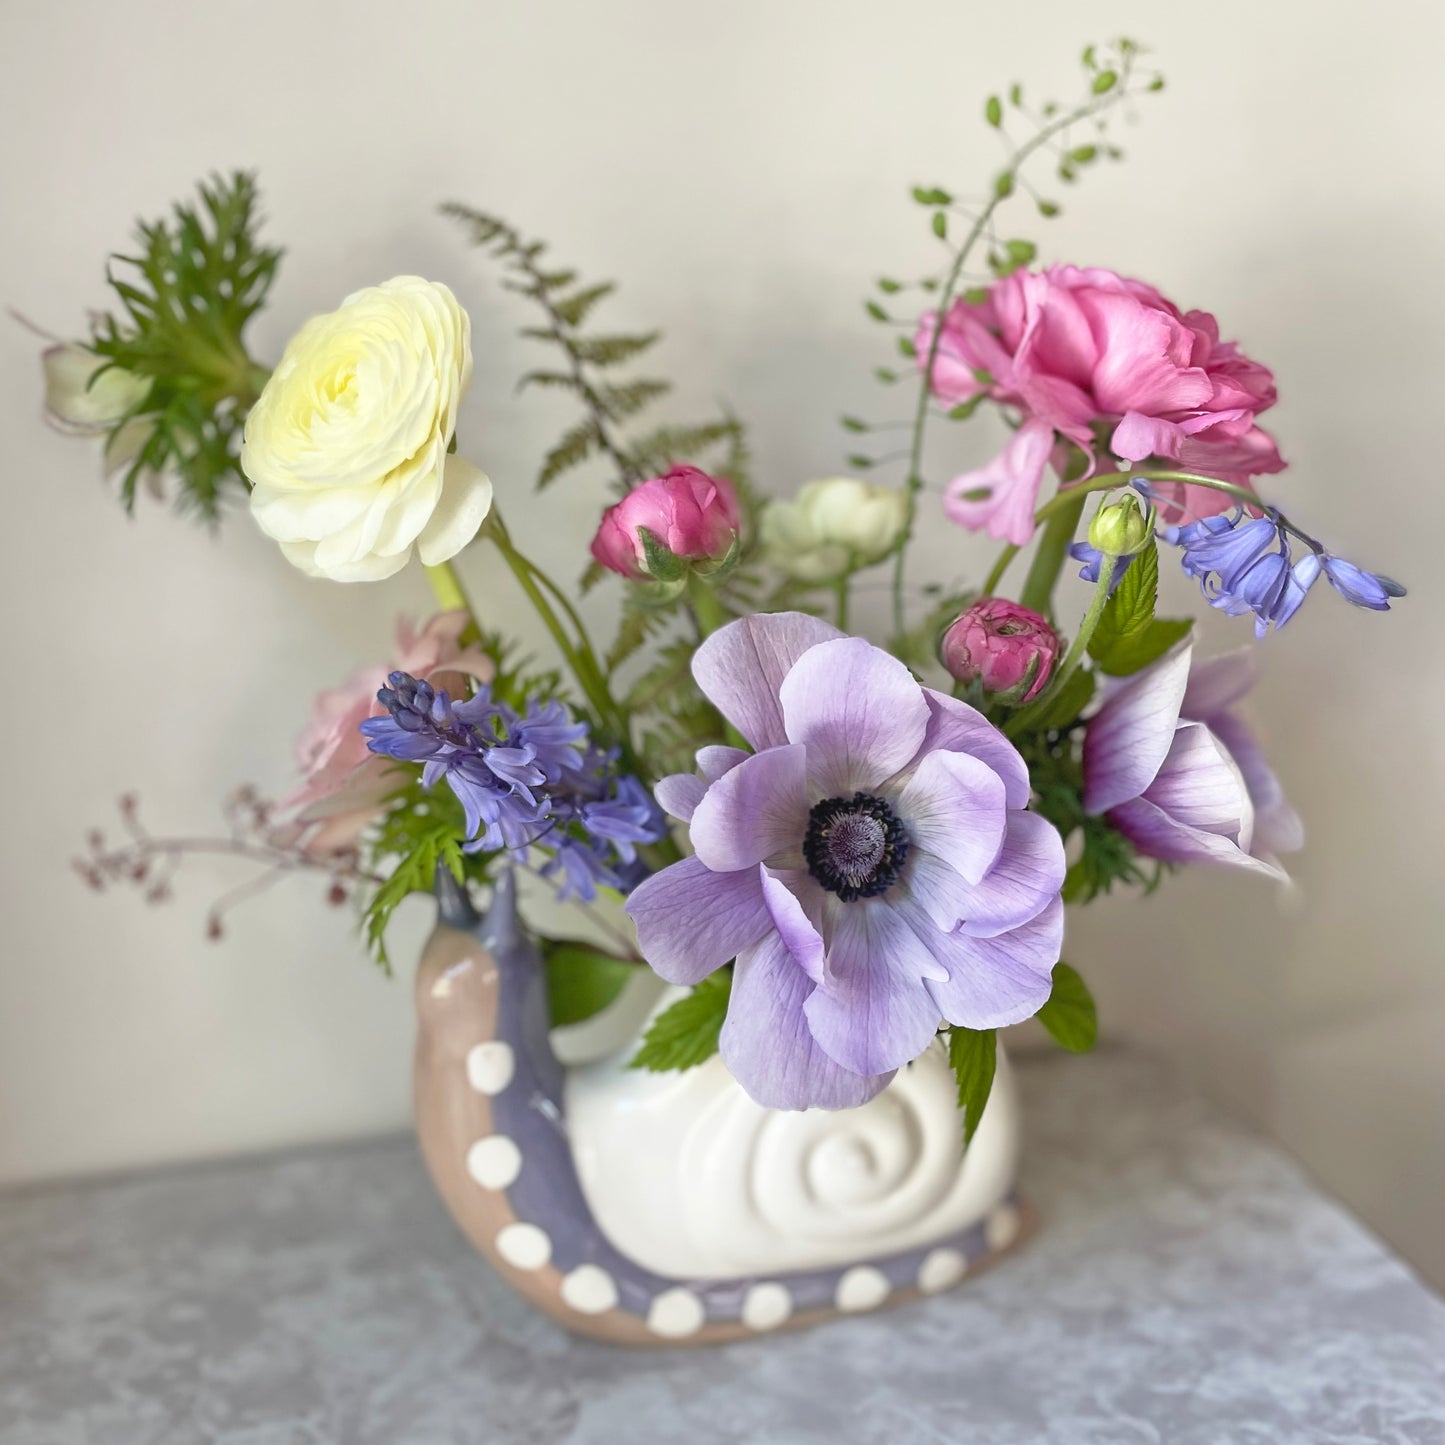 PREORDER Mother’s Day Flowers - Snail Budvase